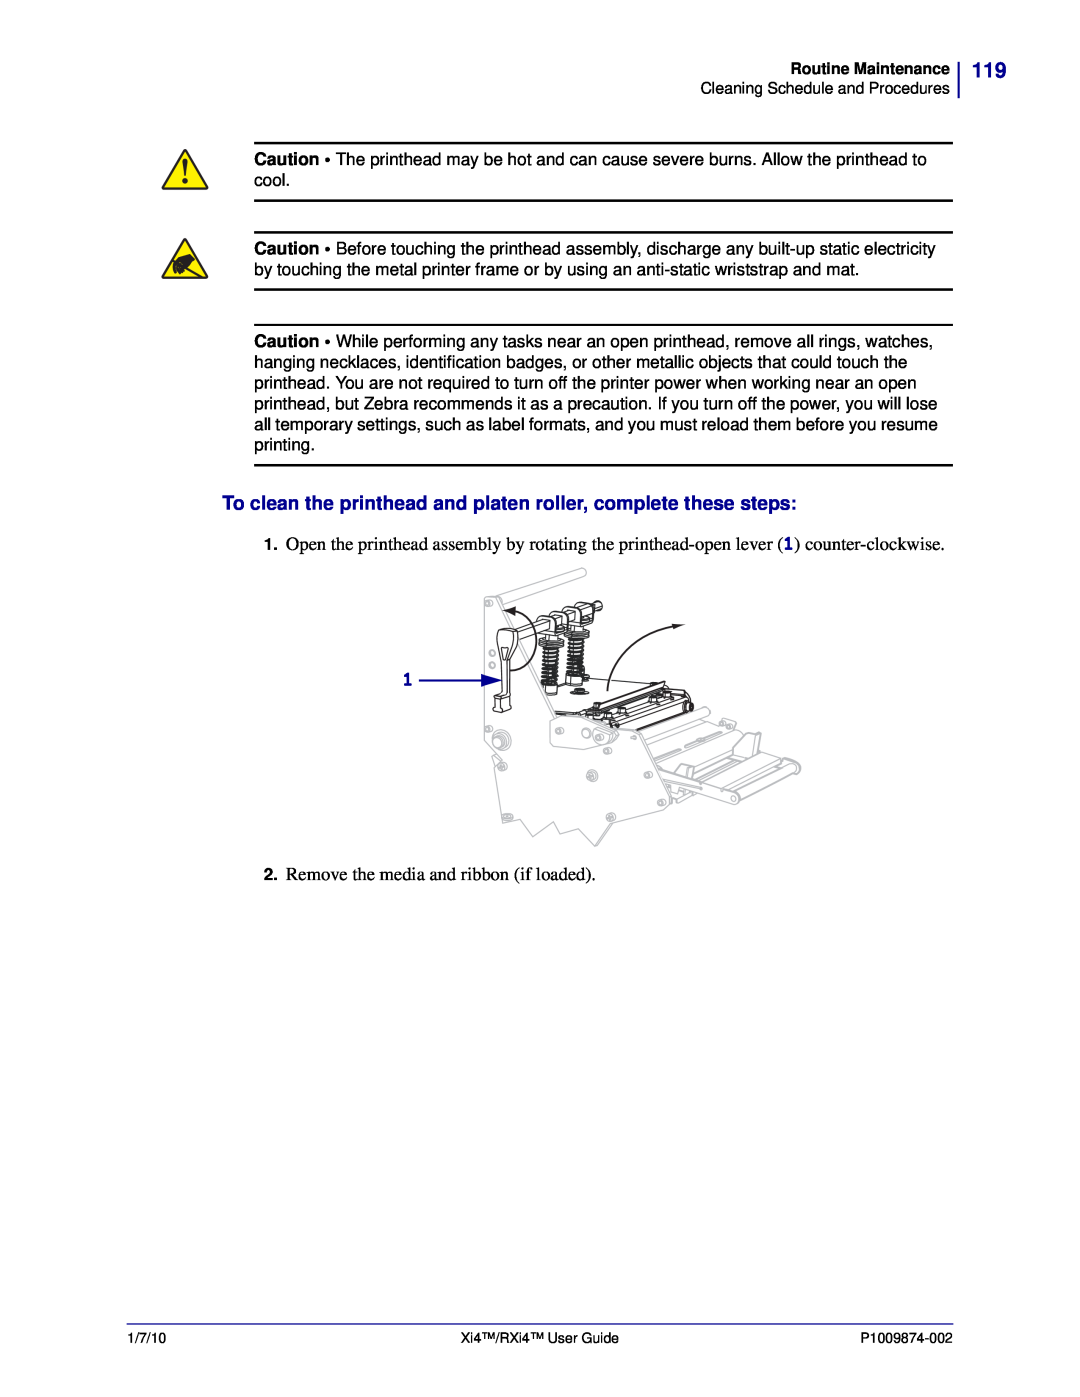 Zebra Technologies RXI4TM, 14080100200, 17080100200 manual To clean the printhead and platen roller, complete these steps 